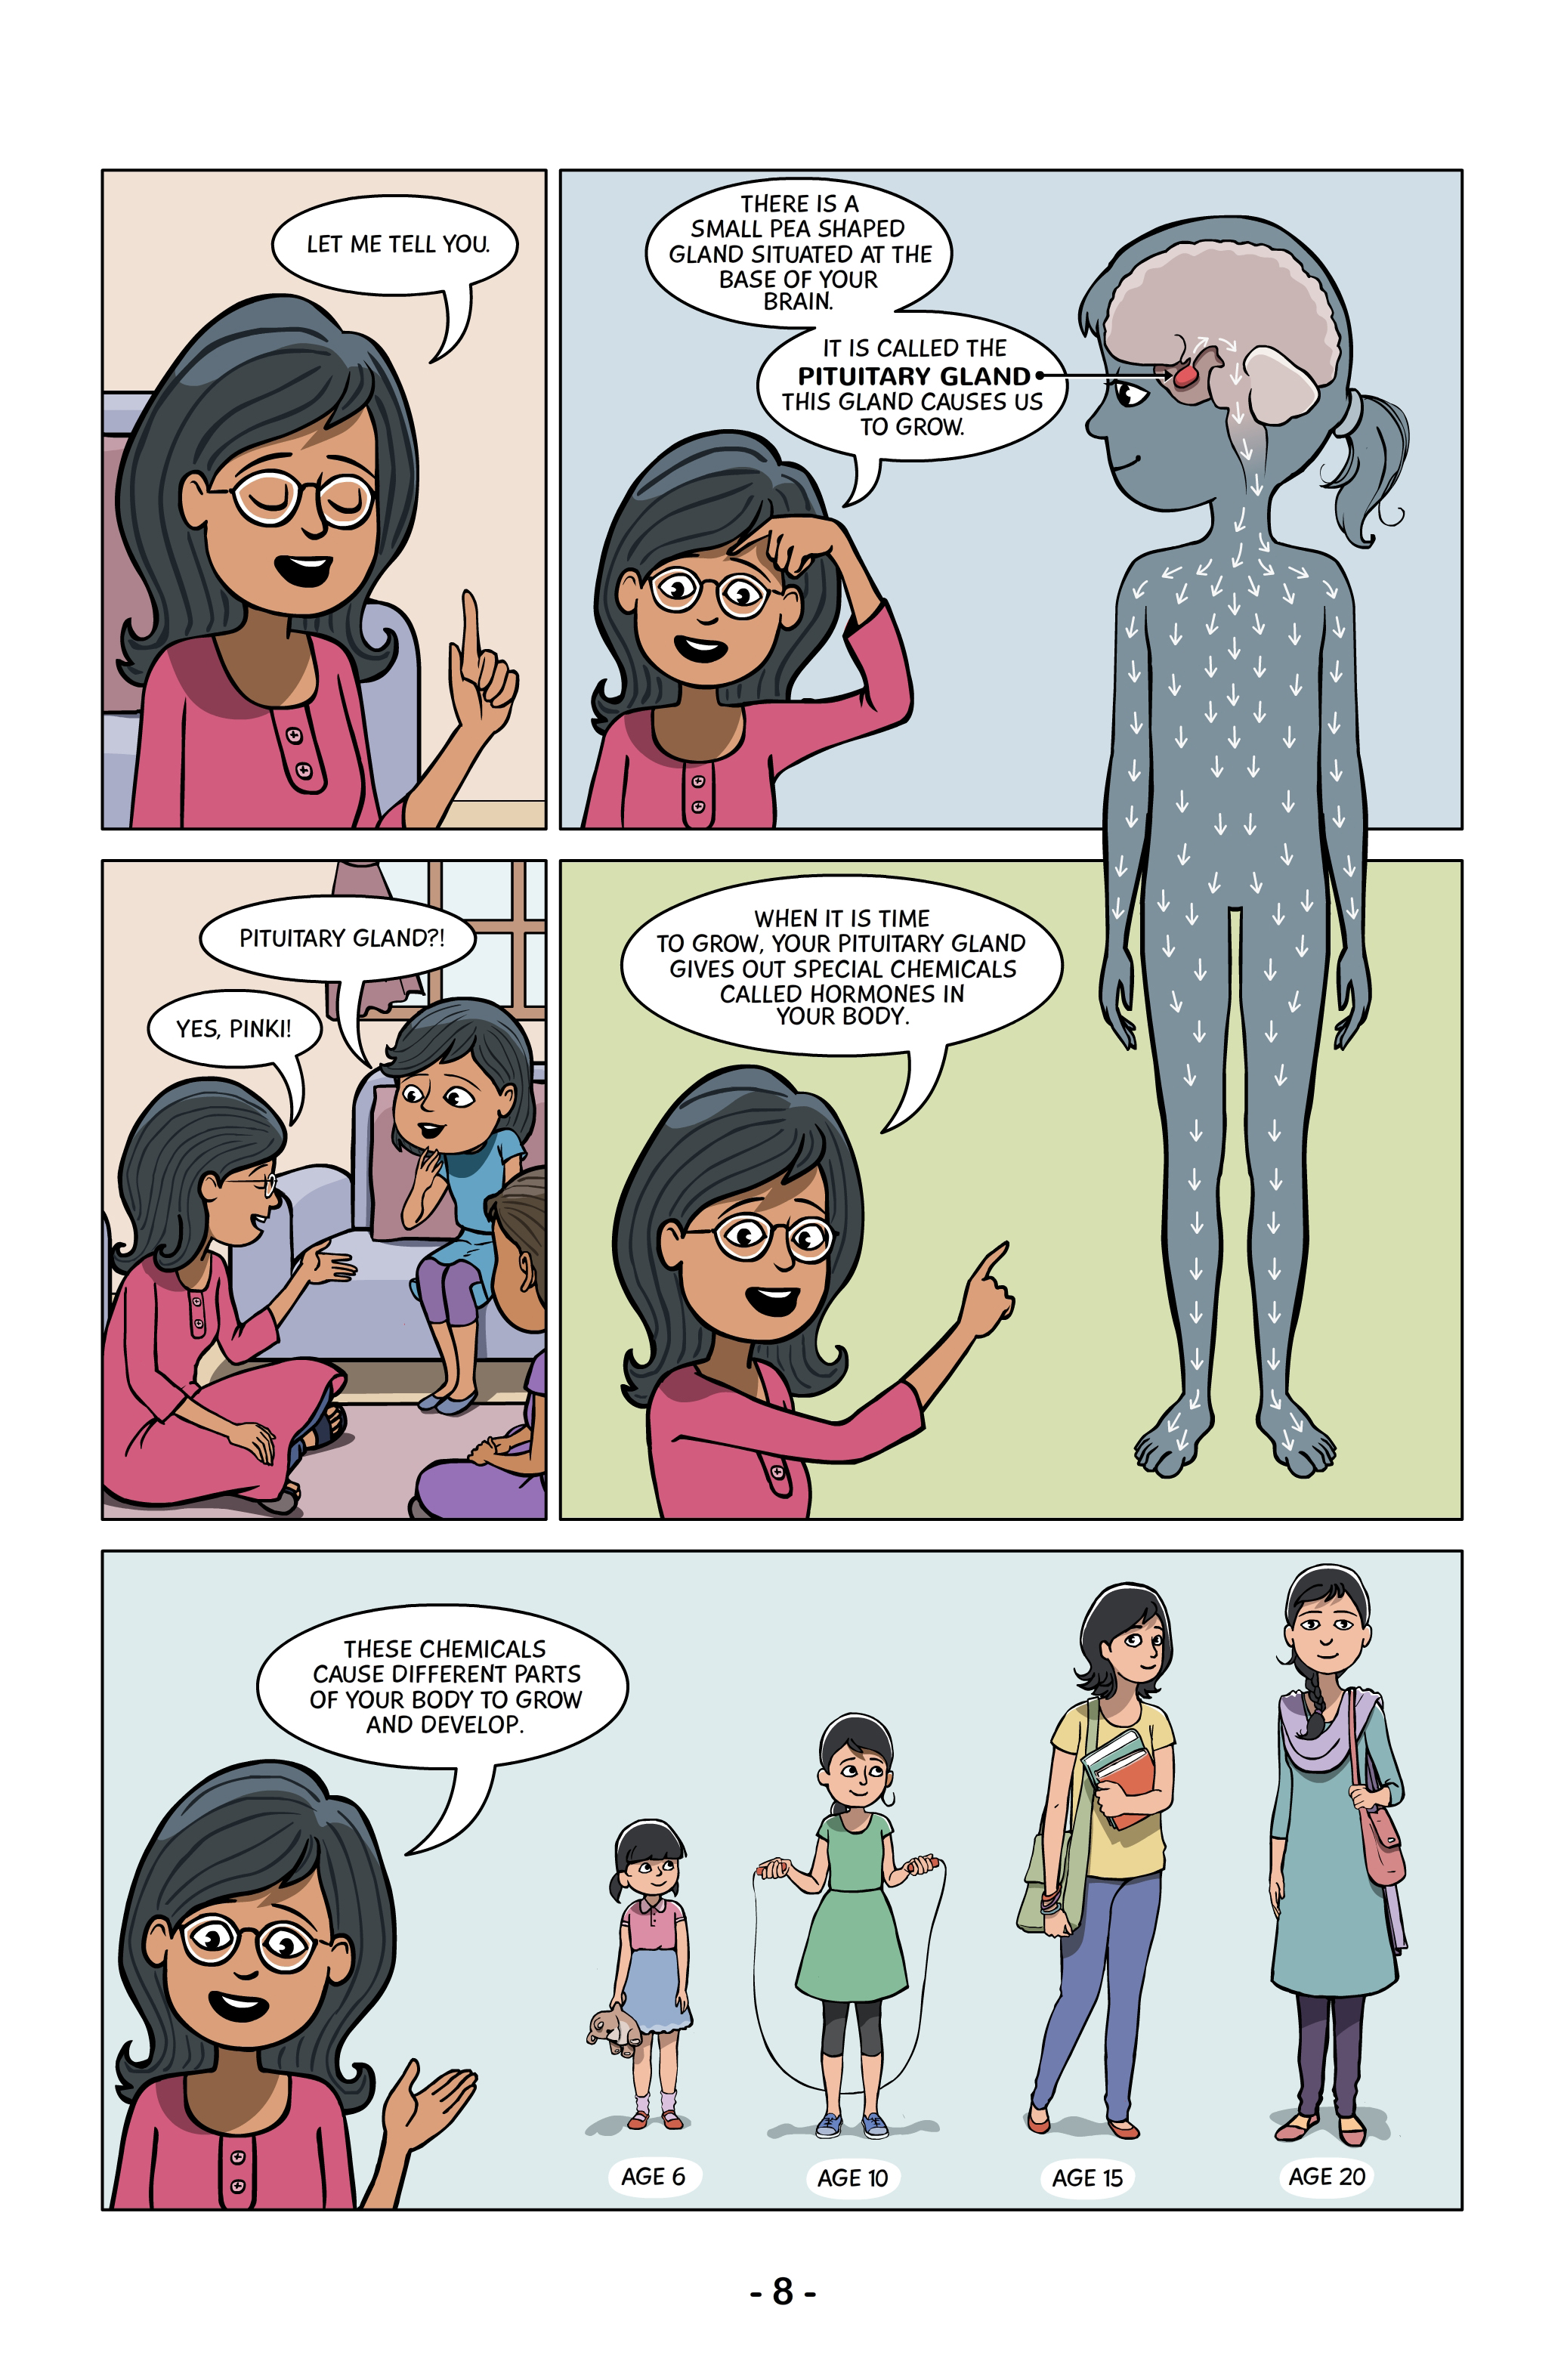 A page from Menstrupedia's publication, Menstrupedia Comic. The comic was launched in September 2014 after a successful crowdfunding campaign. (Courtesy of Menstrupedia)